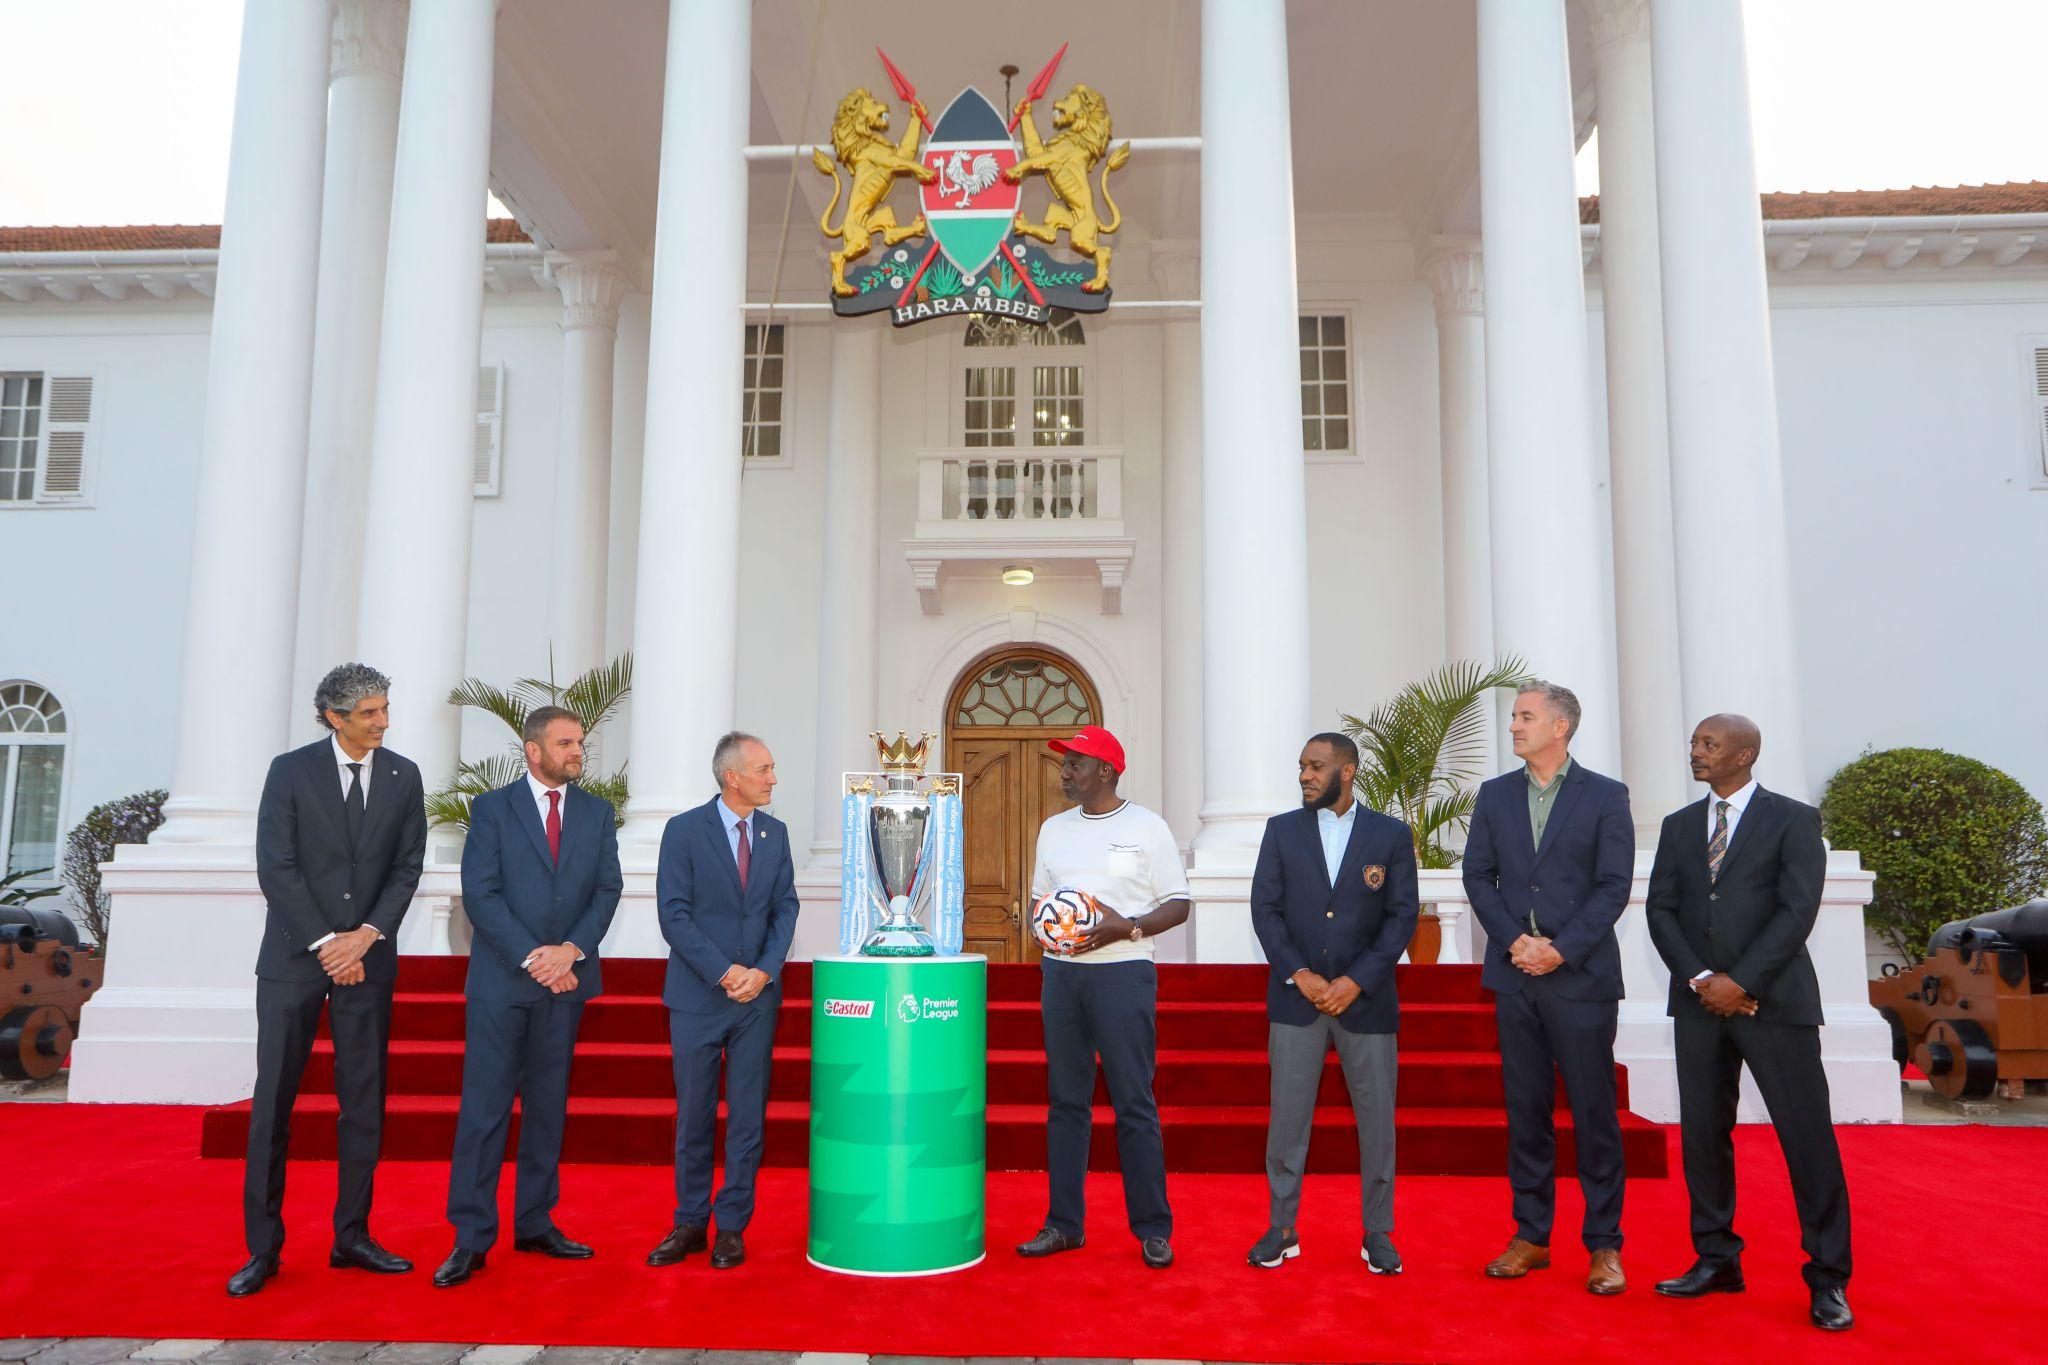 PREMIER LEAGUE TROPHY TO VISIT KENYA FOR AN EXCLUSIVE VIEWING EVENT